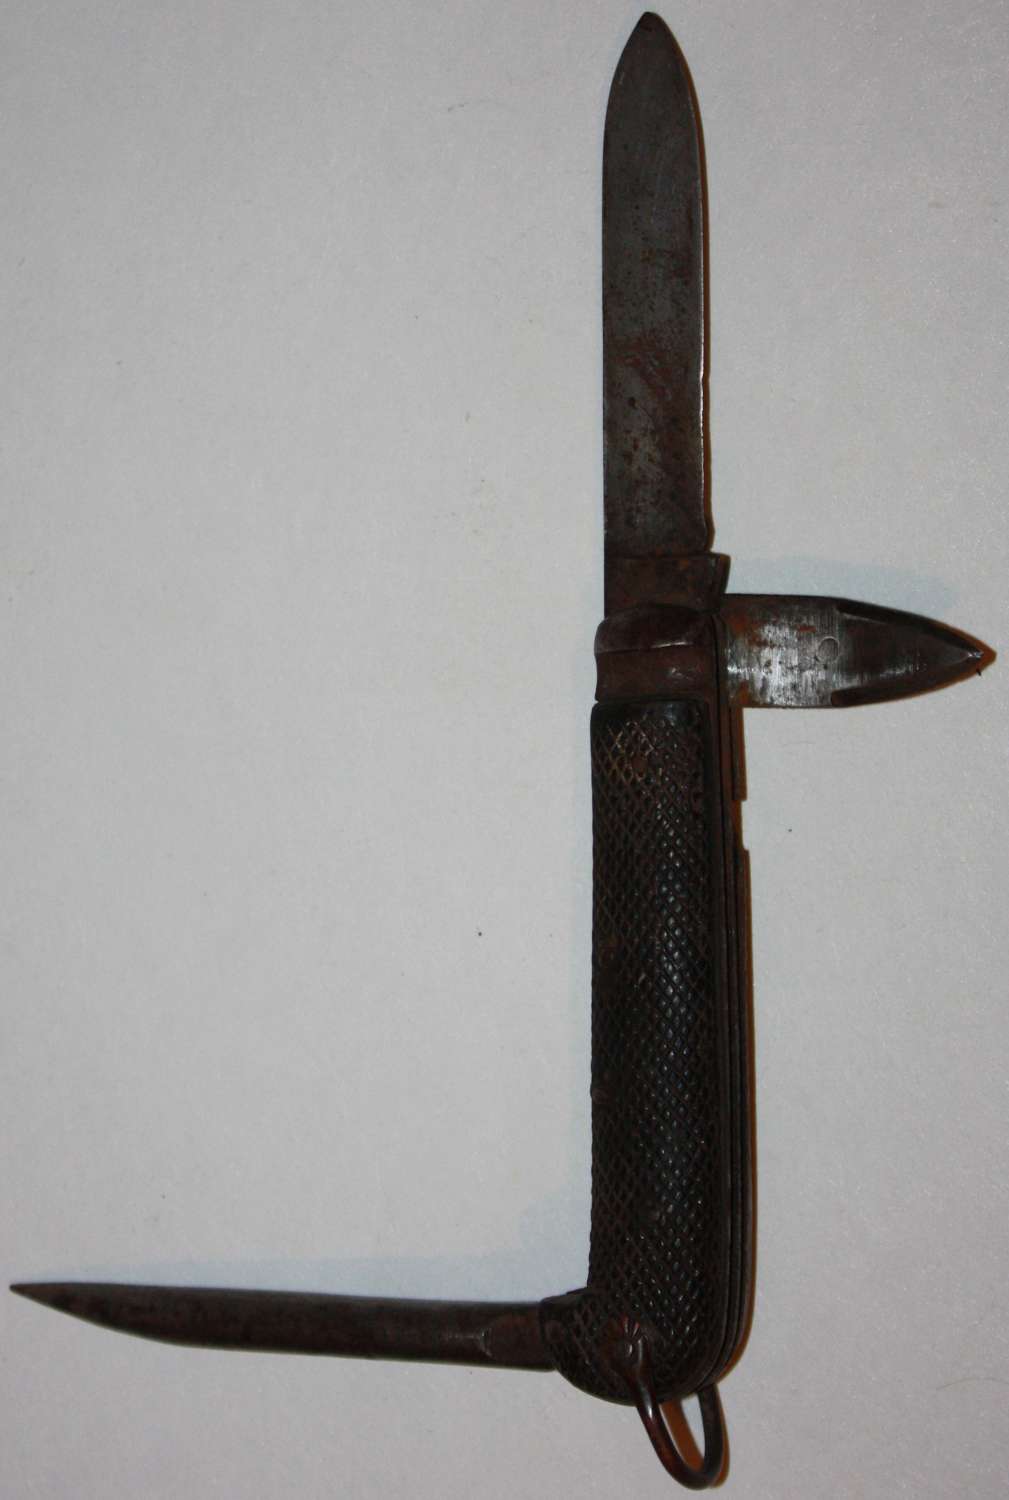 A GOOD PRE WWII LARGE SIZE BRITISH ARMY PENKNIFE / JACK KNIFE